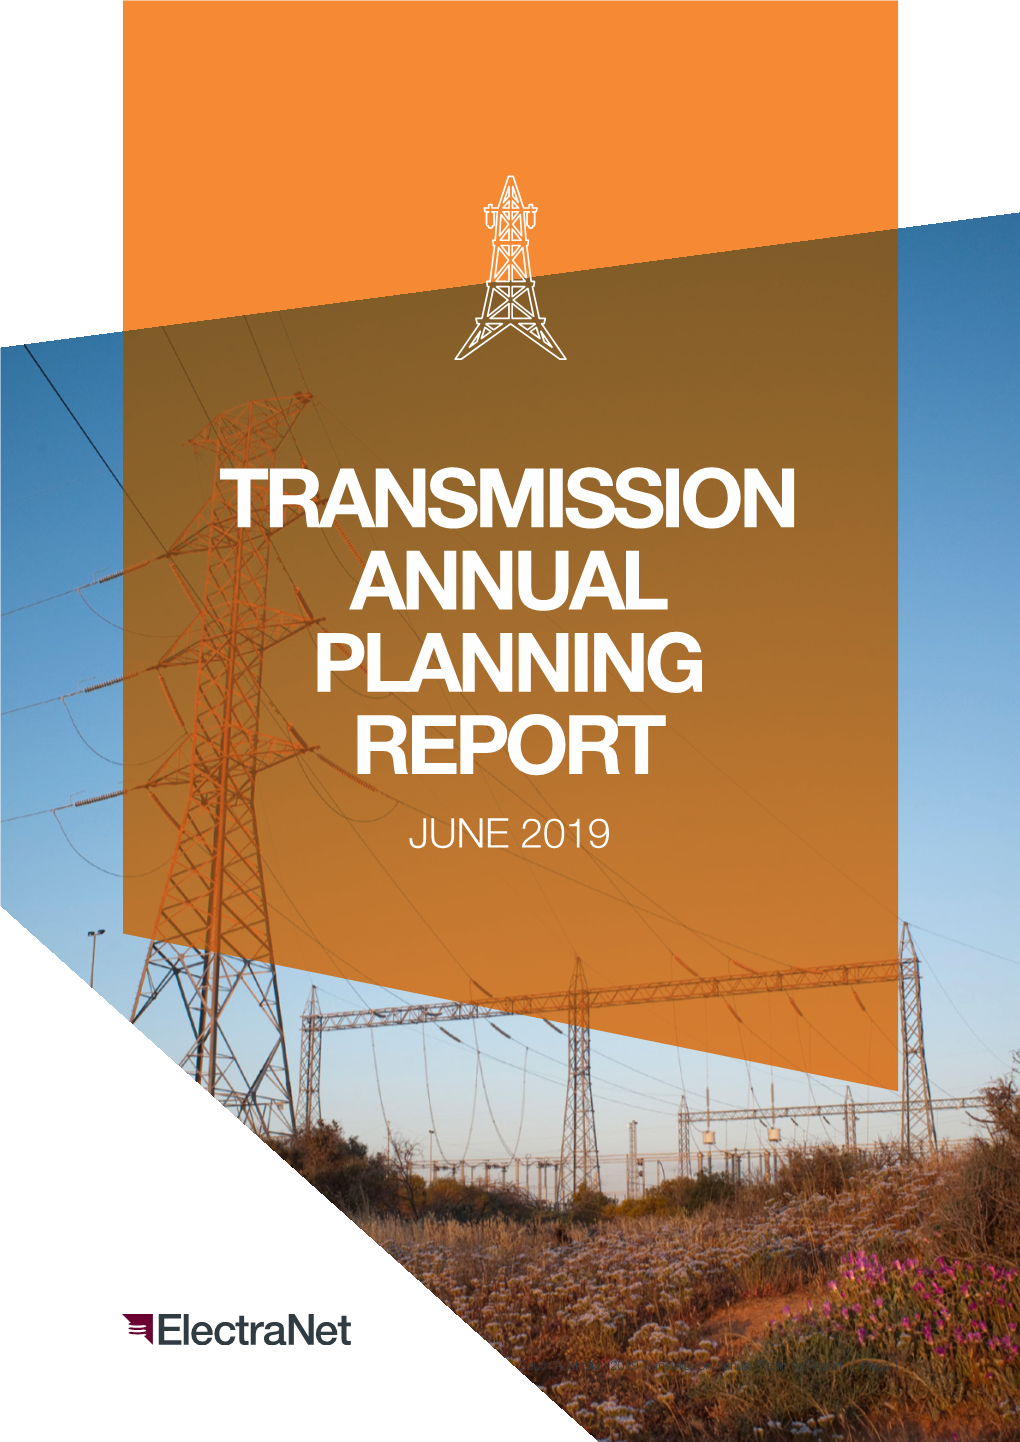 Transmission Annual Planning Report June 2019